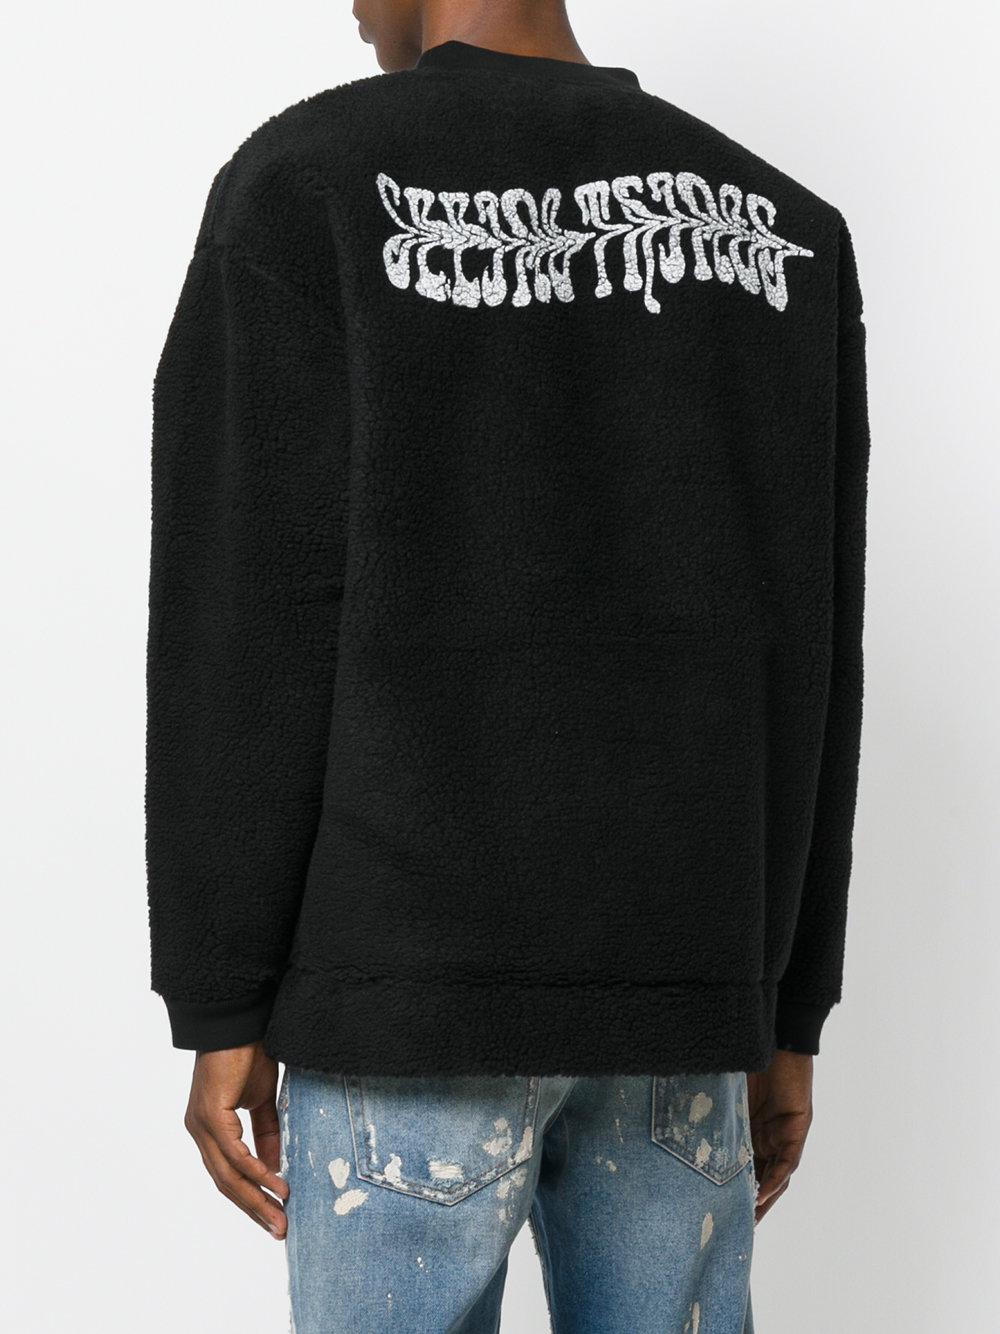 affjedring Allerede løn Off-White c/o Virgil Abloh Cotton 'seeing Things' Sweater in Black for Men  - Lyst